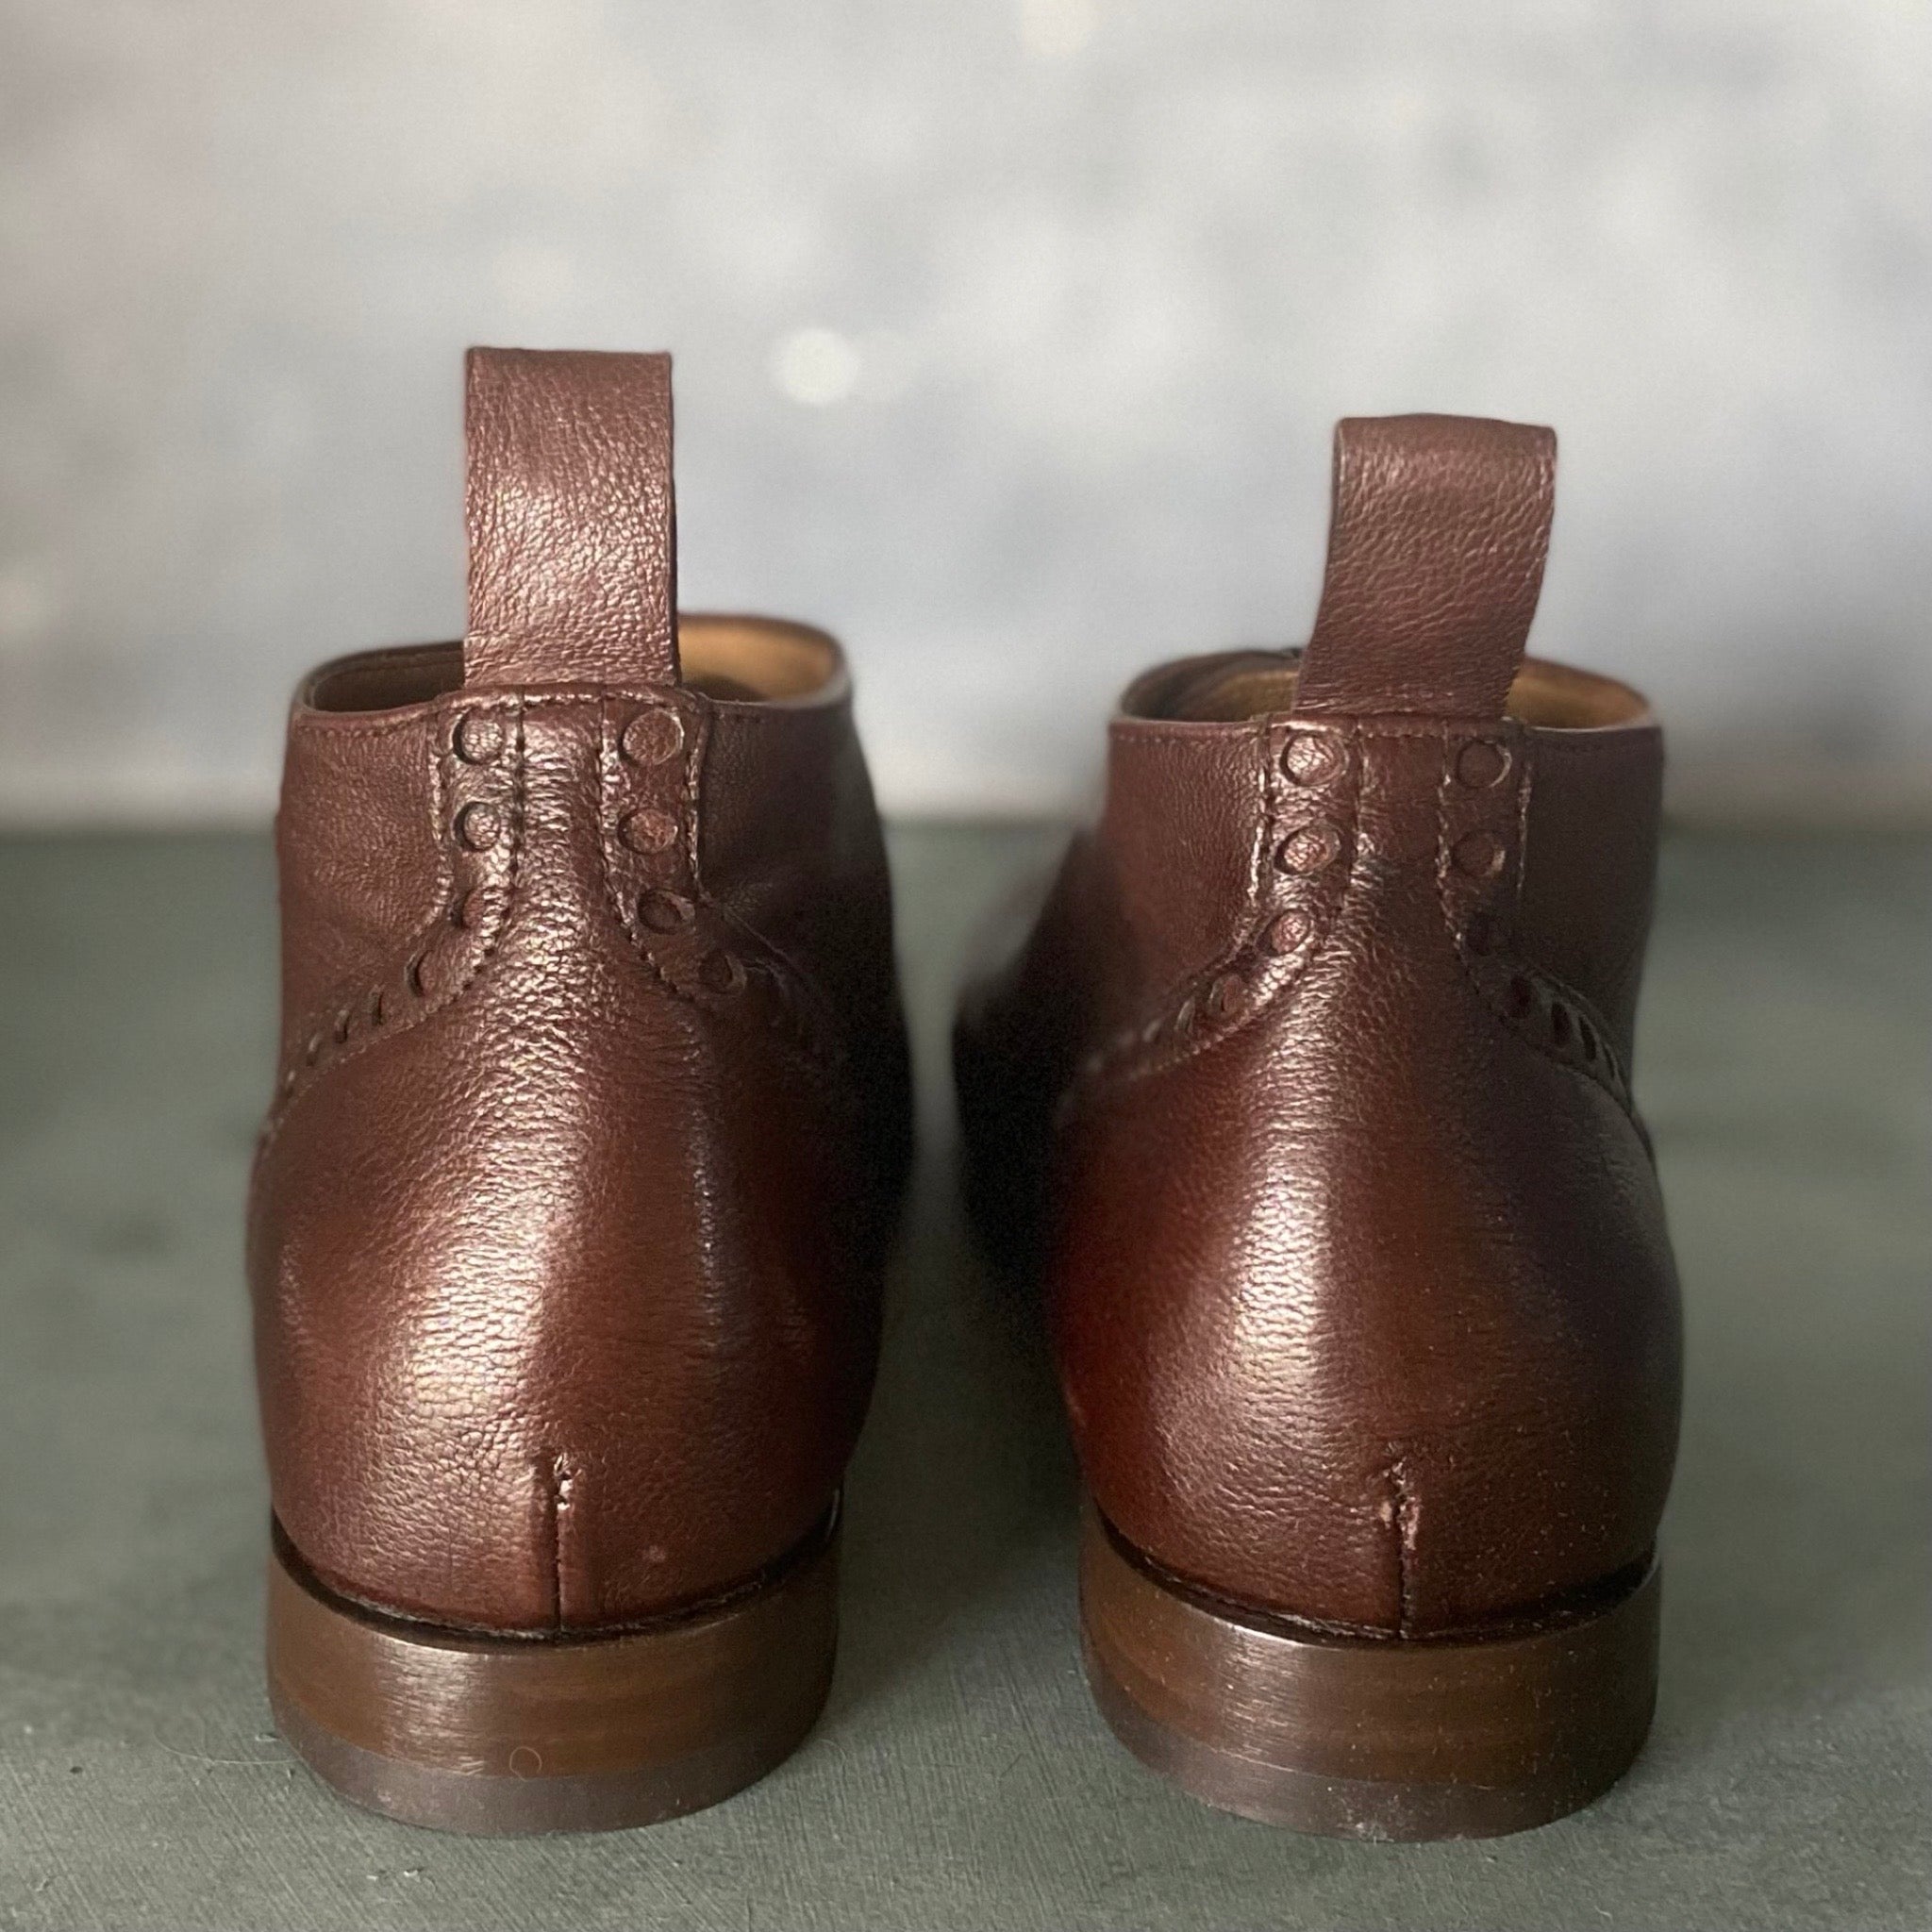 Victoria Varrasso Chocolate Leather Bootlettes